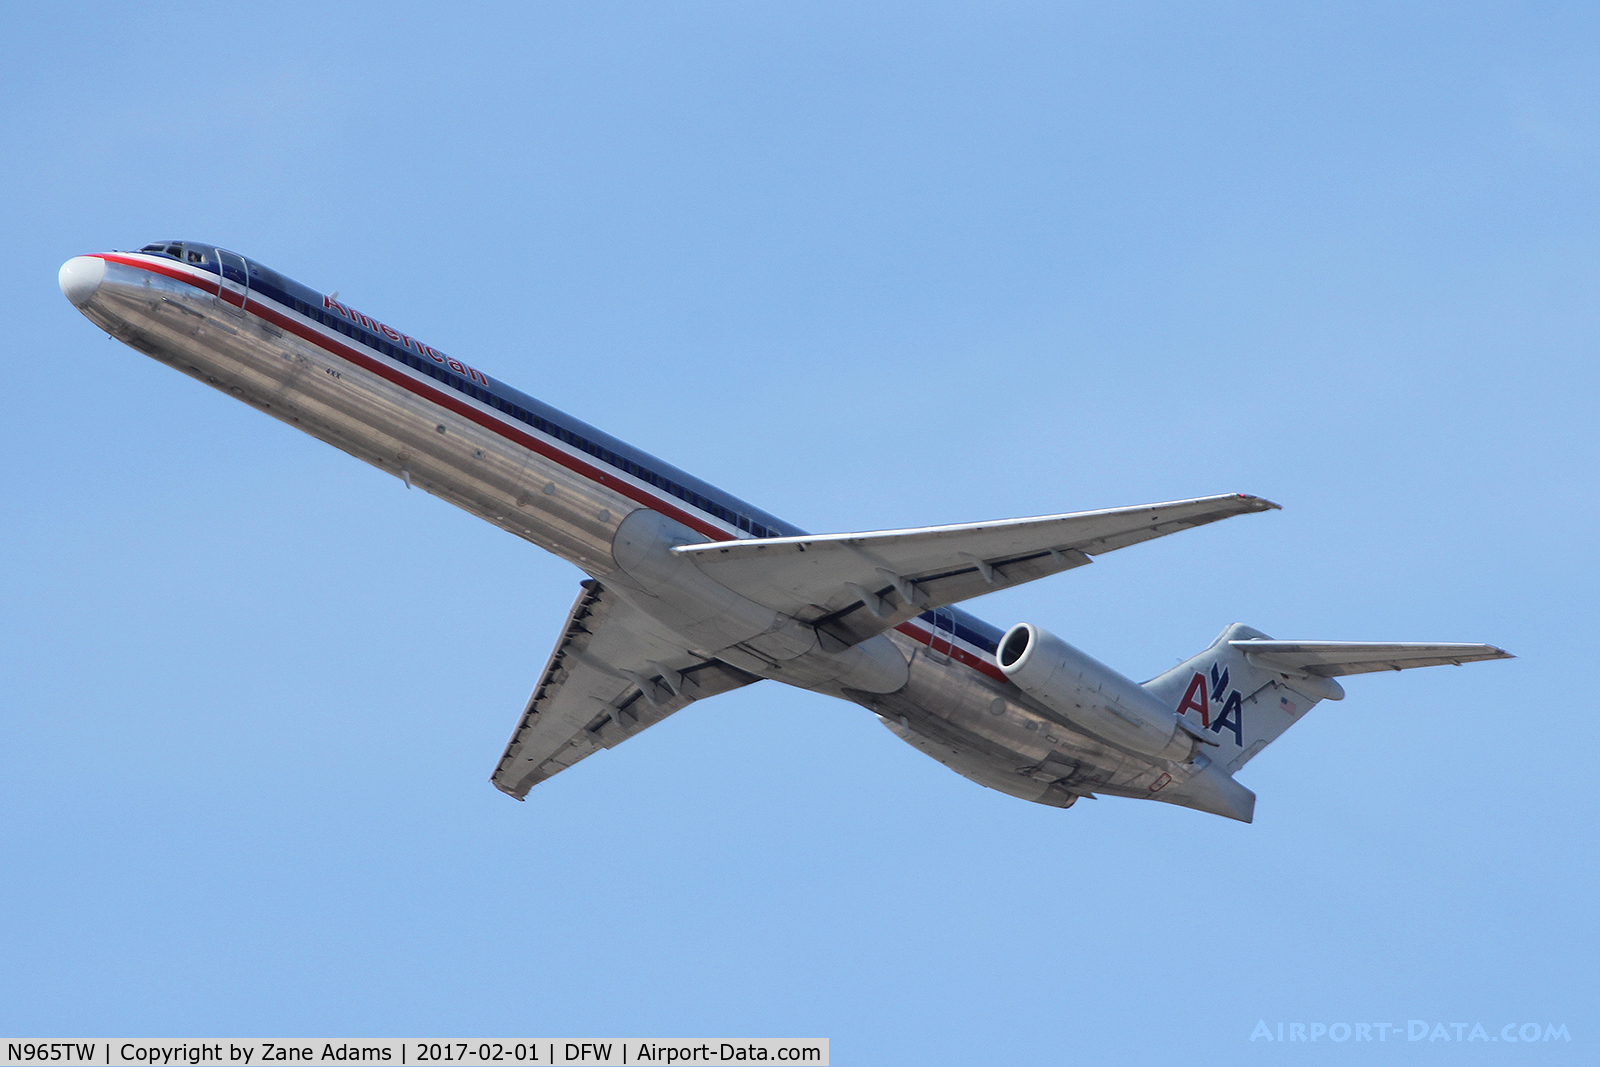 N965TW, 1999 McDonnell Douglas MD-83 (DC-9-83) C/N 53615, Departing DFW Airport